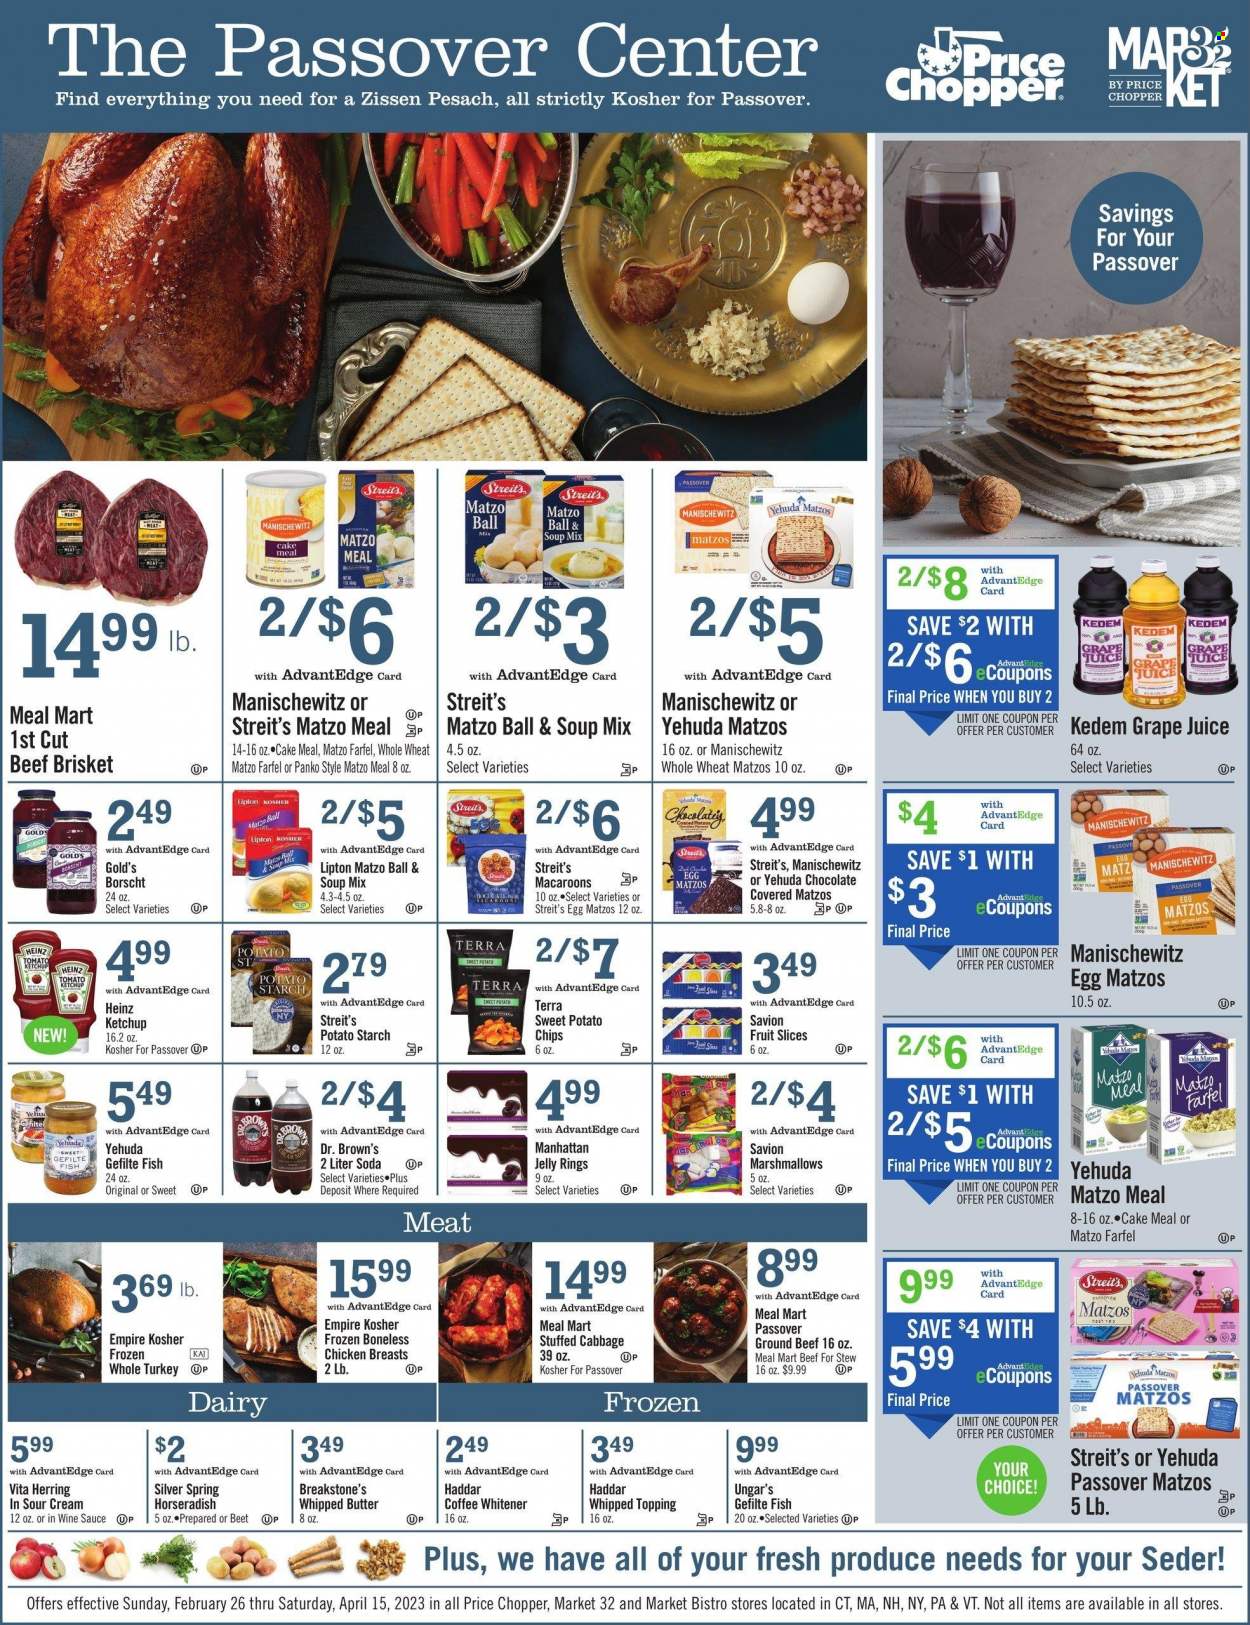 Price Chopper Flyer - 02/26/2023 - 04/15/2023 - Sales products - cake, macaroons, panko breadcrumbs, horseradish, herring, fish, soup mix, soup, sauce, brisket, eggs, whipped butter, sour cream, coffee whitener, sweet potato fries, marshmallows, jelly, Savion, fruit slices, potato chips, matzo meal, starch, potato starch, topping, Heinz, ketchup, juice, Lipton, Dr. Brown's, Kedem, soda, whole turkey, chicken breasts, turkey meat, beef meat, ground beef, beef brisket. Page 1.